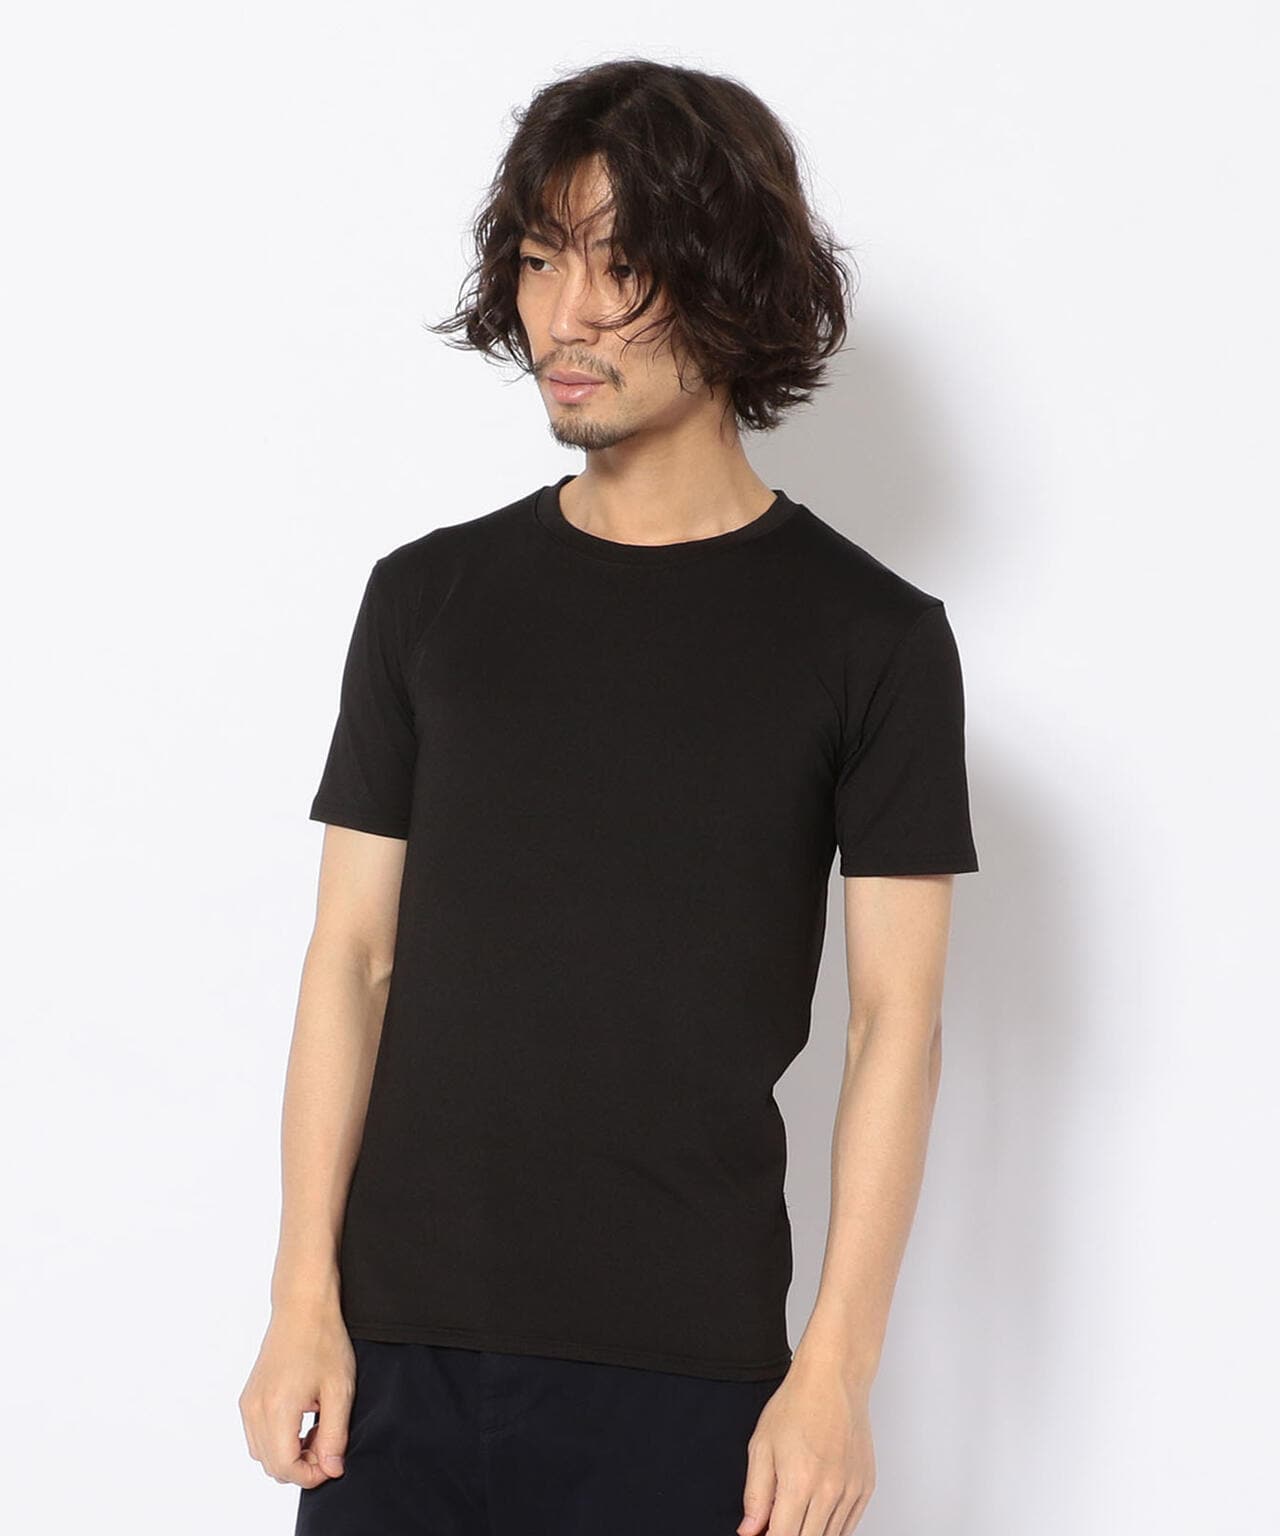 DAILY S/S T-SHIRT #2379 - BLACK / XL20220709 - Tシャツ/カットソー